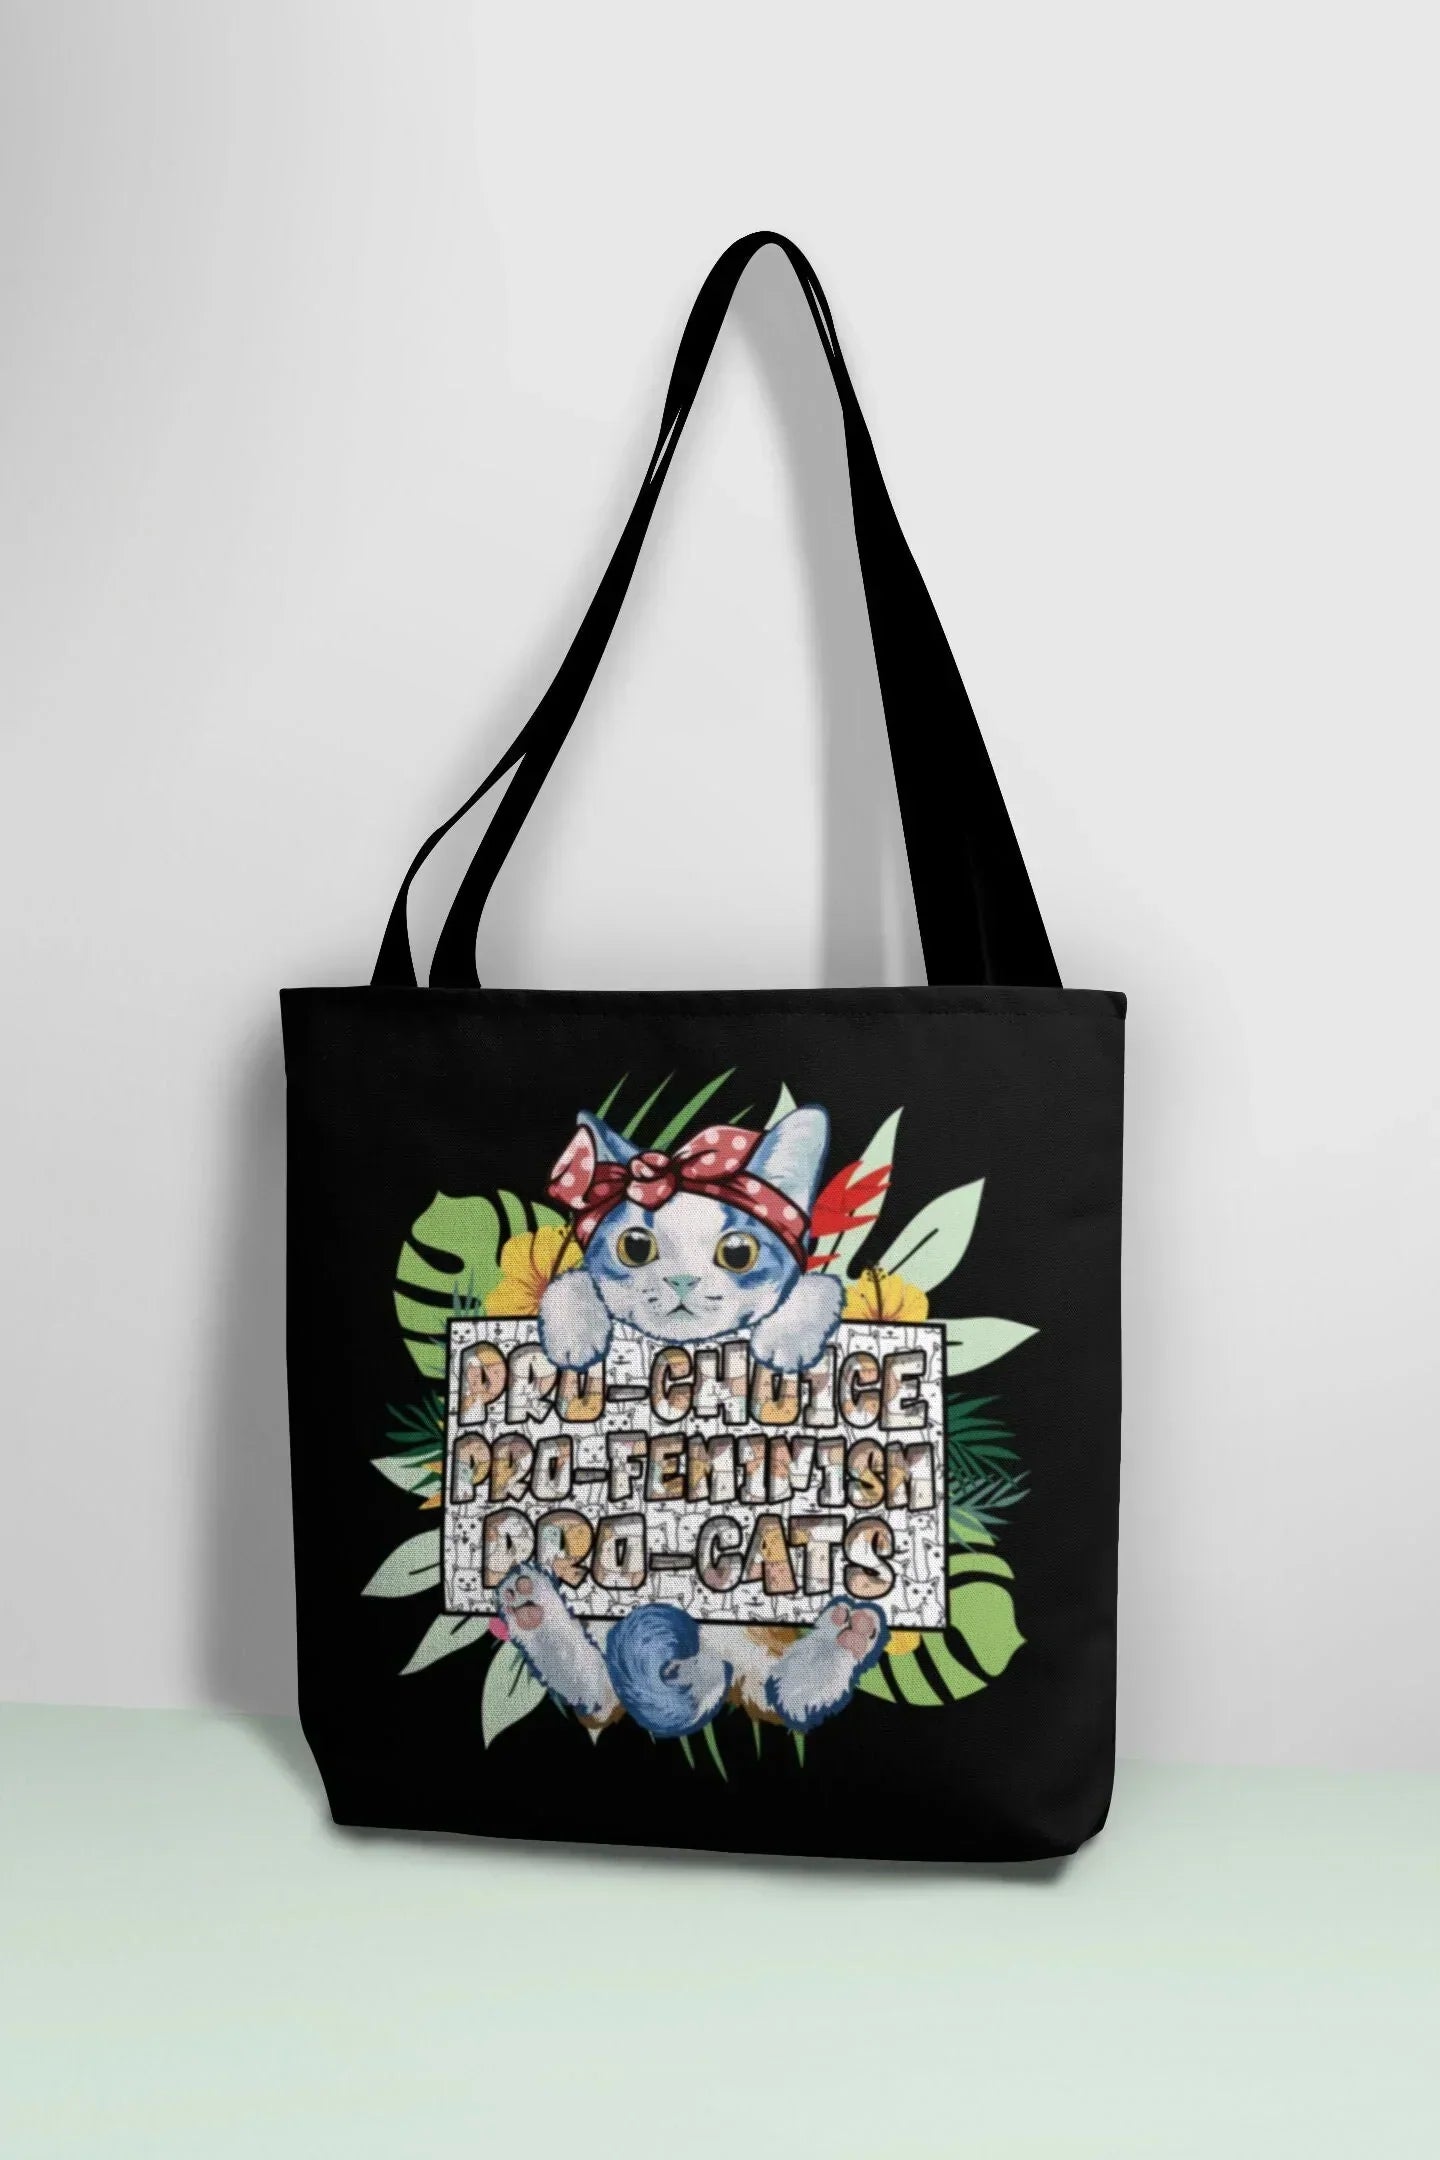 Cat Tote Bag, Aesthetic Tote Bag with Pockets, Hippie Cat Lovers Gift, Cat Mom Canvas Bag, Pro Choice Pro Feminism, Funny Cat Themed Gifts HMDesignStudioUS